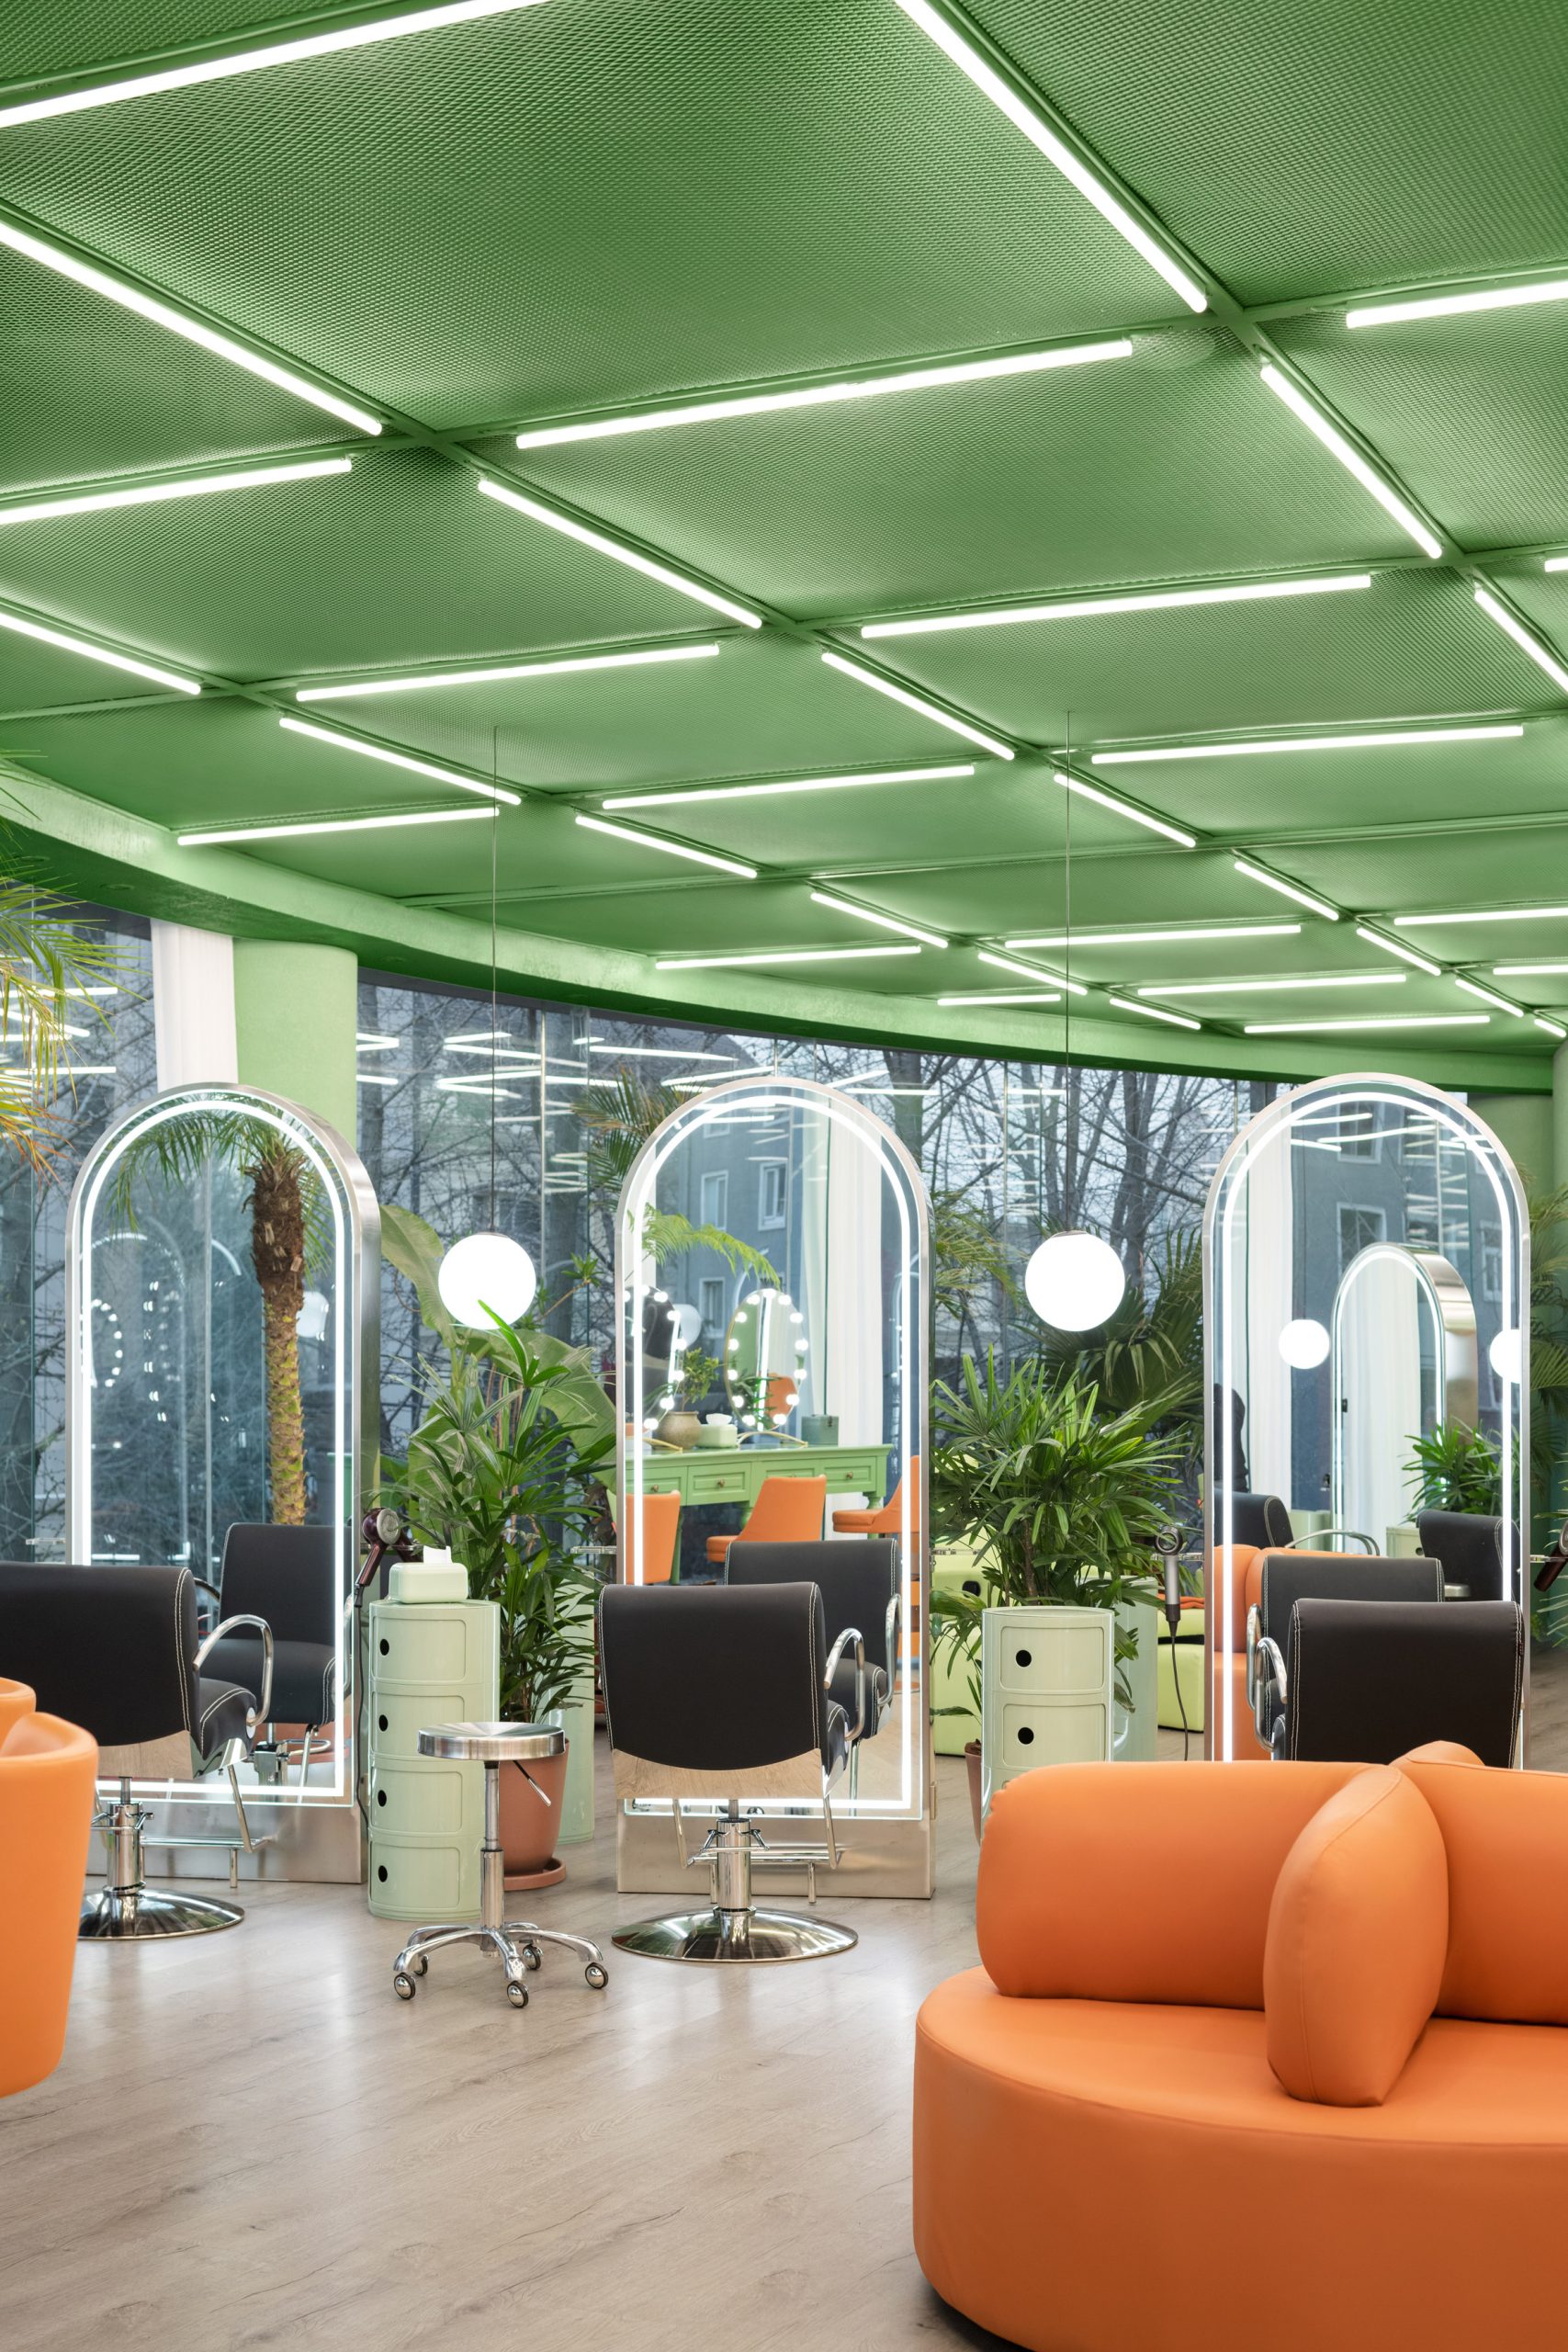 The ceiling is green and has strip lights by IS architecture and design